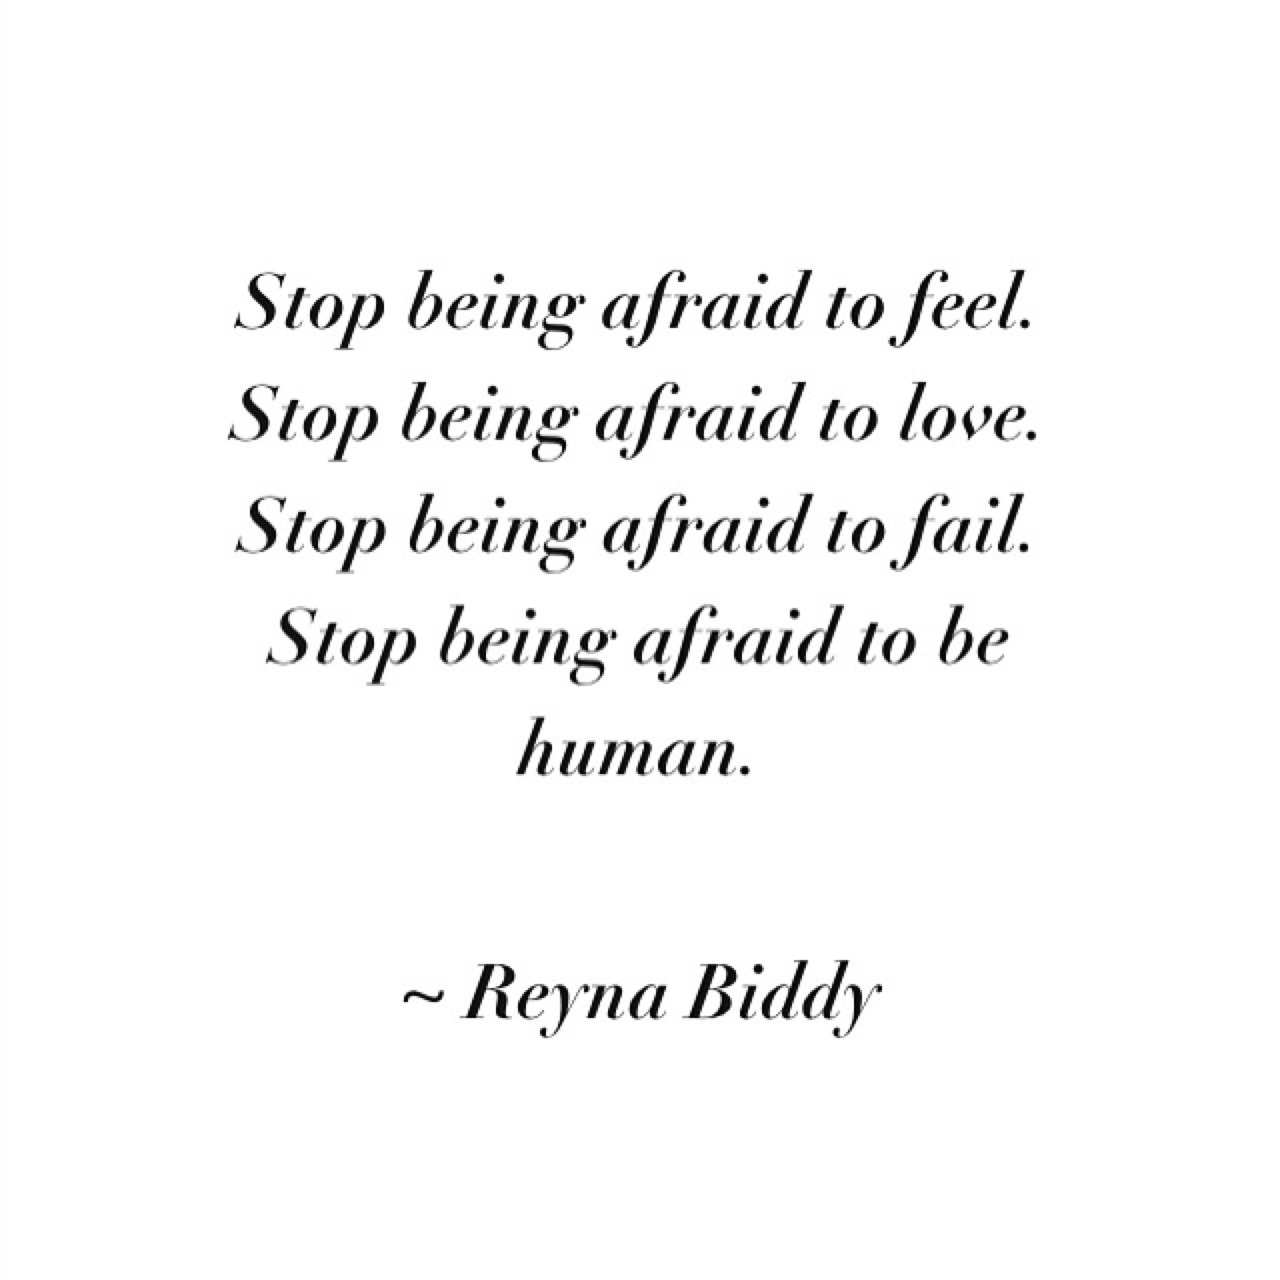 Stop being afraid to live..